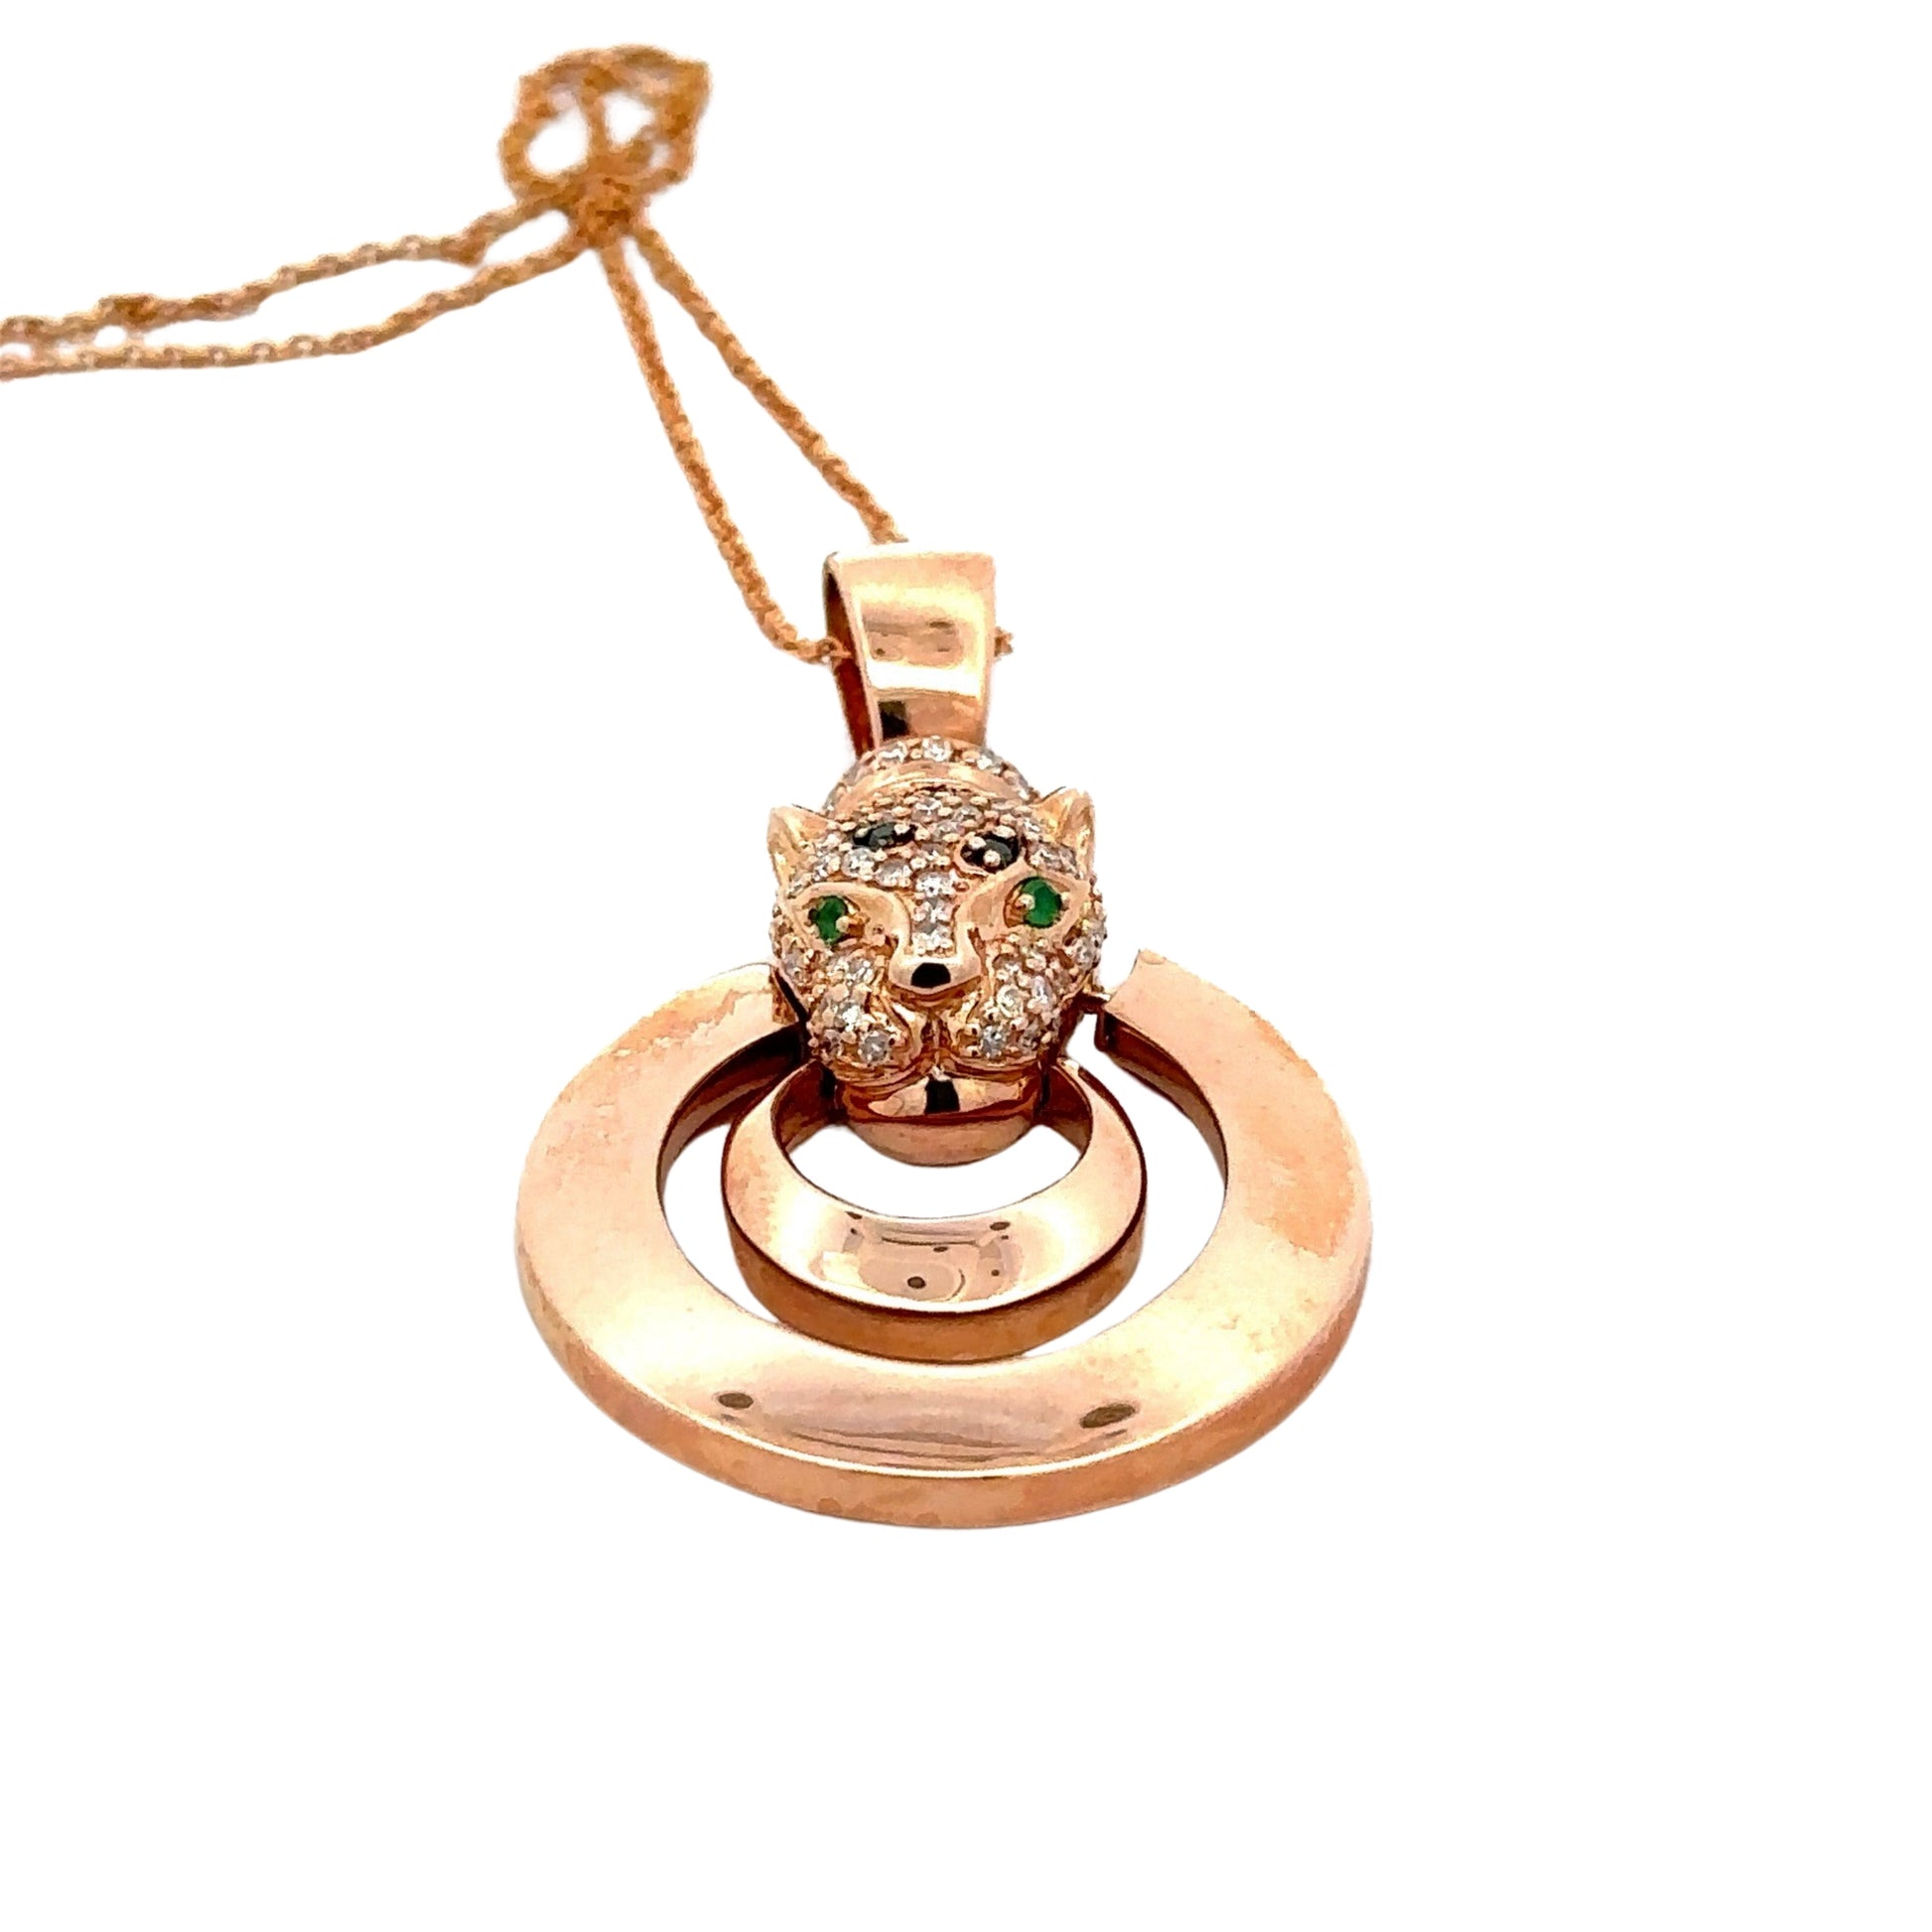 Bottom of rose gold pendant with diamond panther head and 2 emerald gemstones for eyes